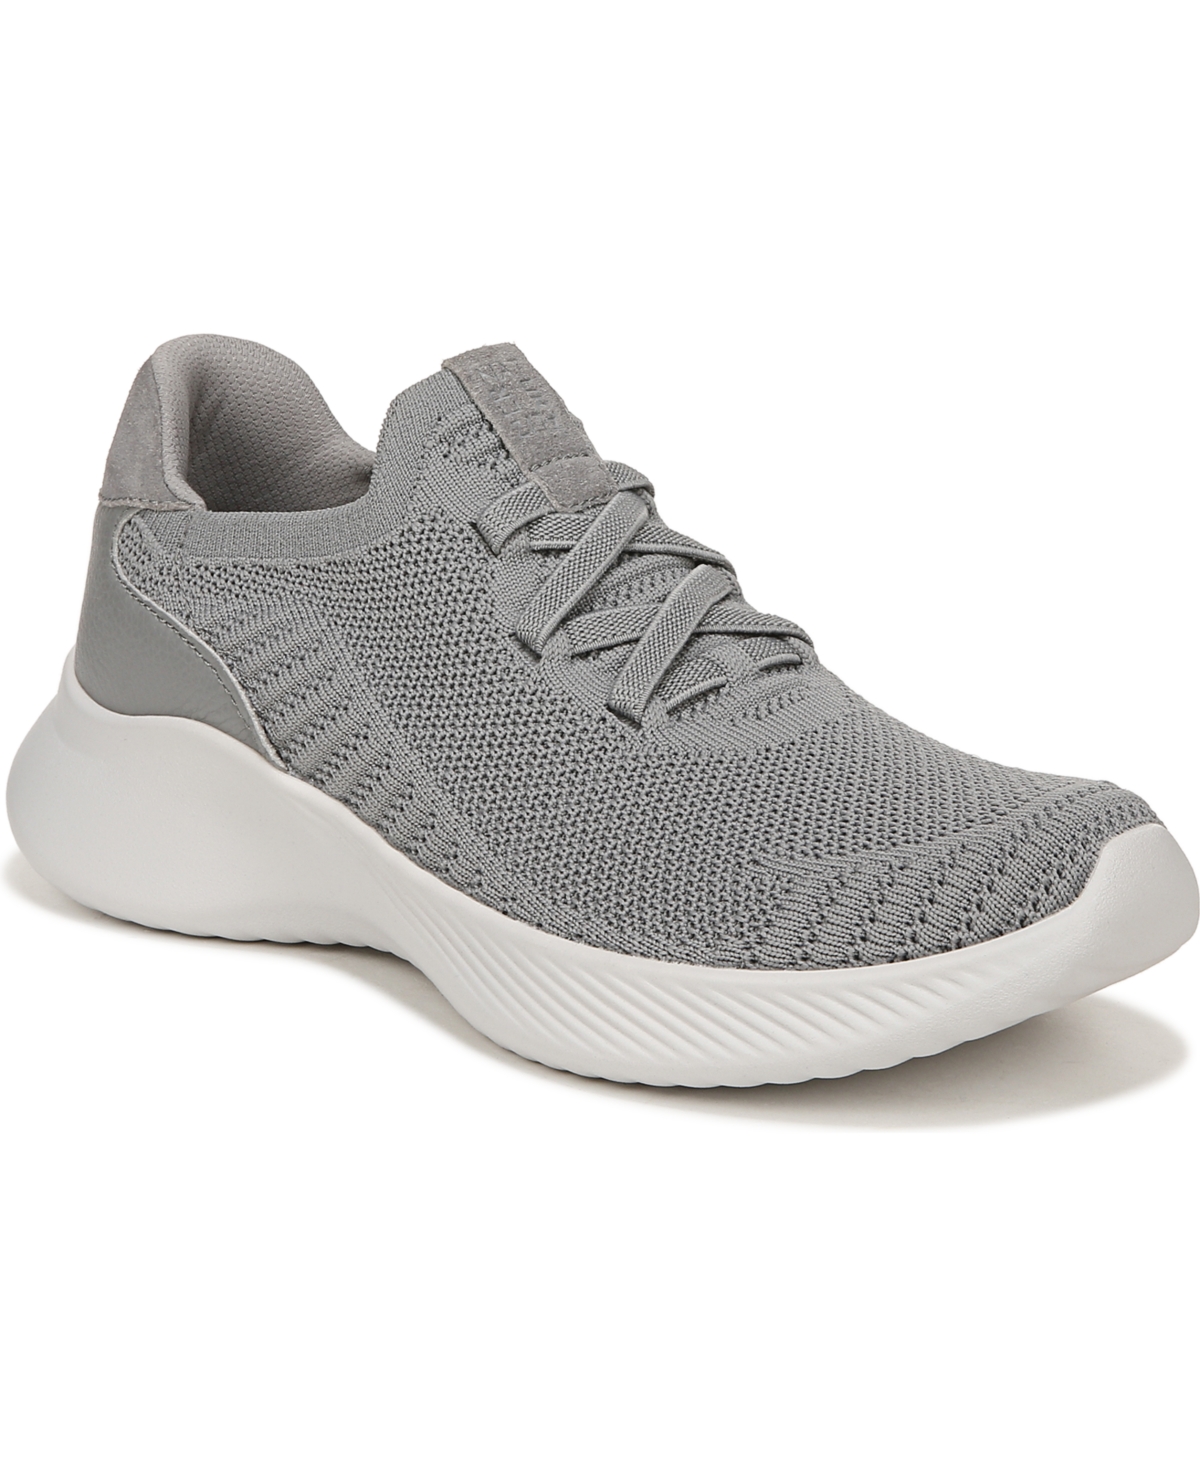 Shop Naturalizer Emerge Slip-on Sneakers In Titanium Grey Flyknit Fabric